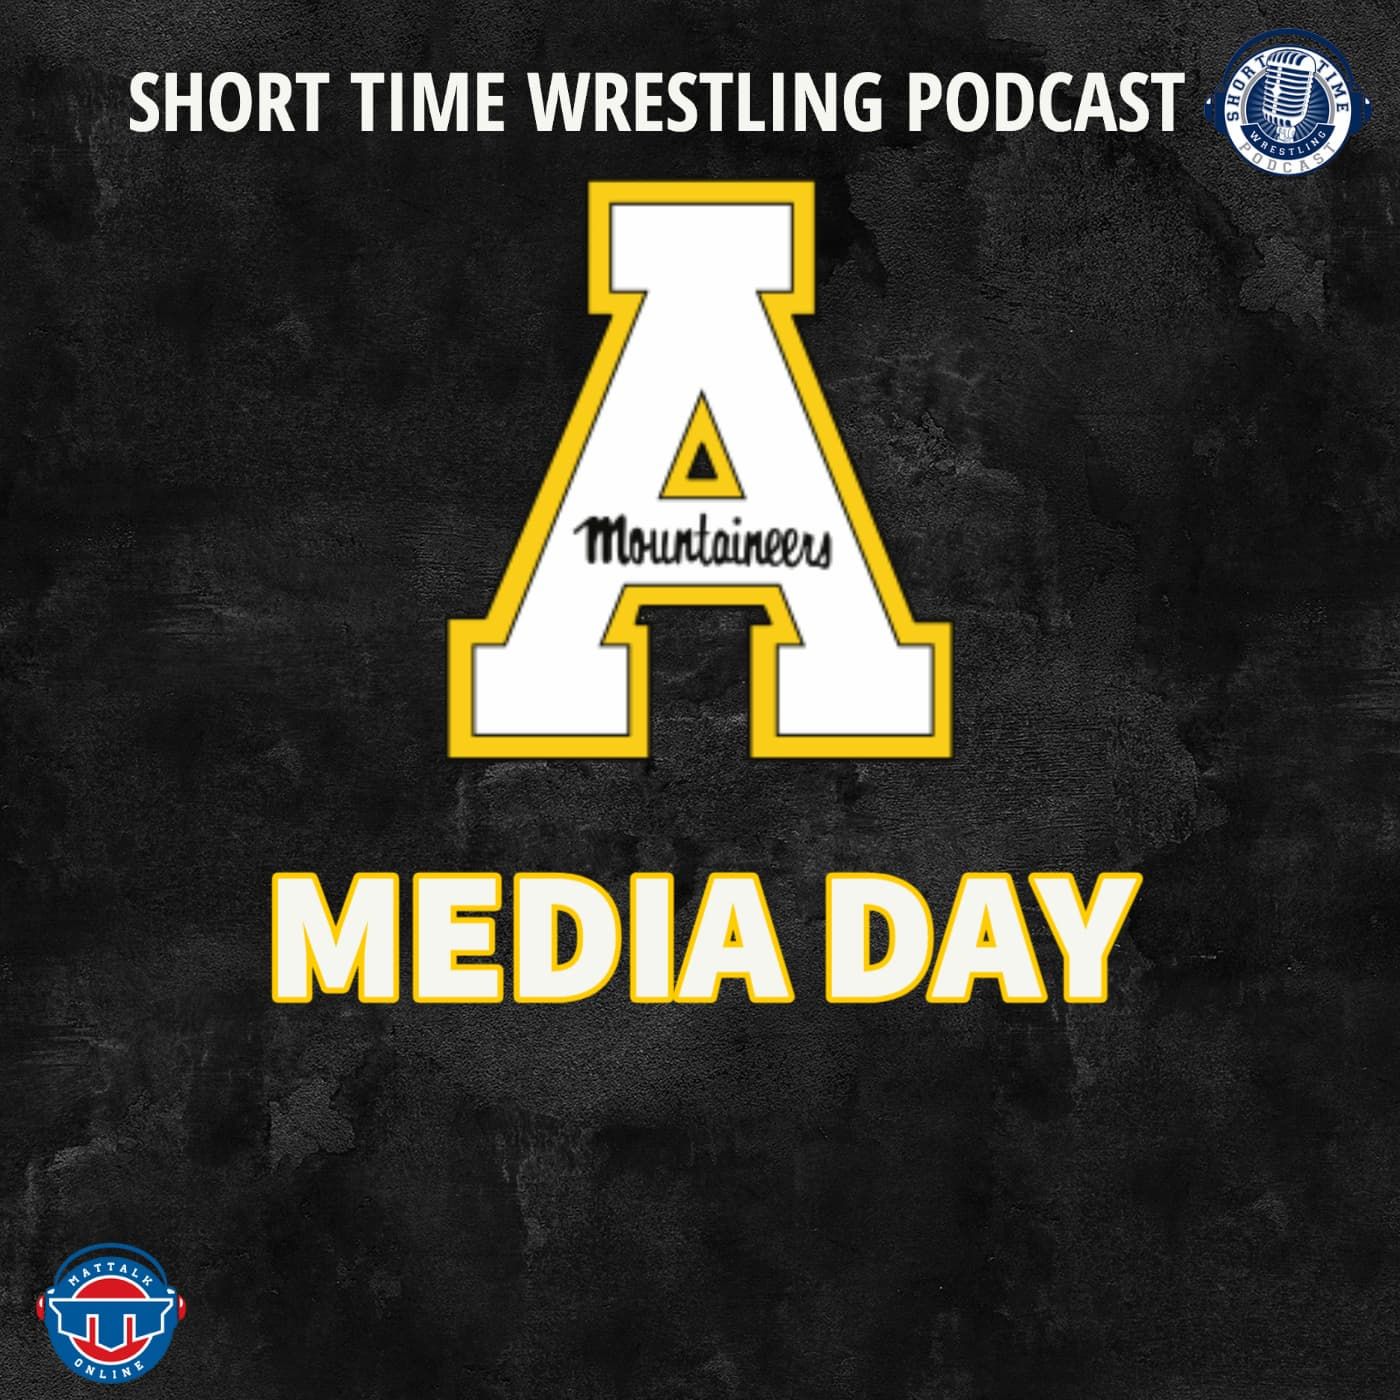 App State Media Day with JohnMark Bentley, Will Formato, Jonathan Millner, Cody Bond and Caleb Smith